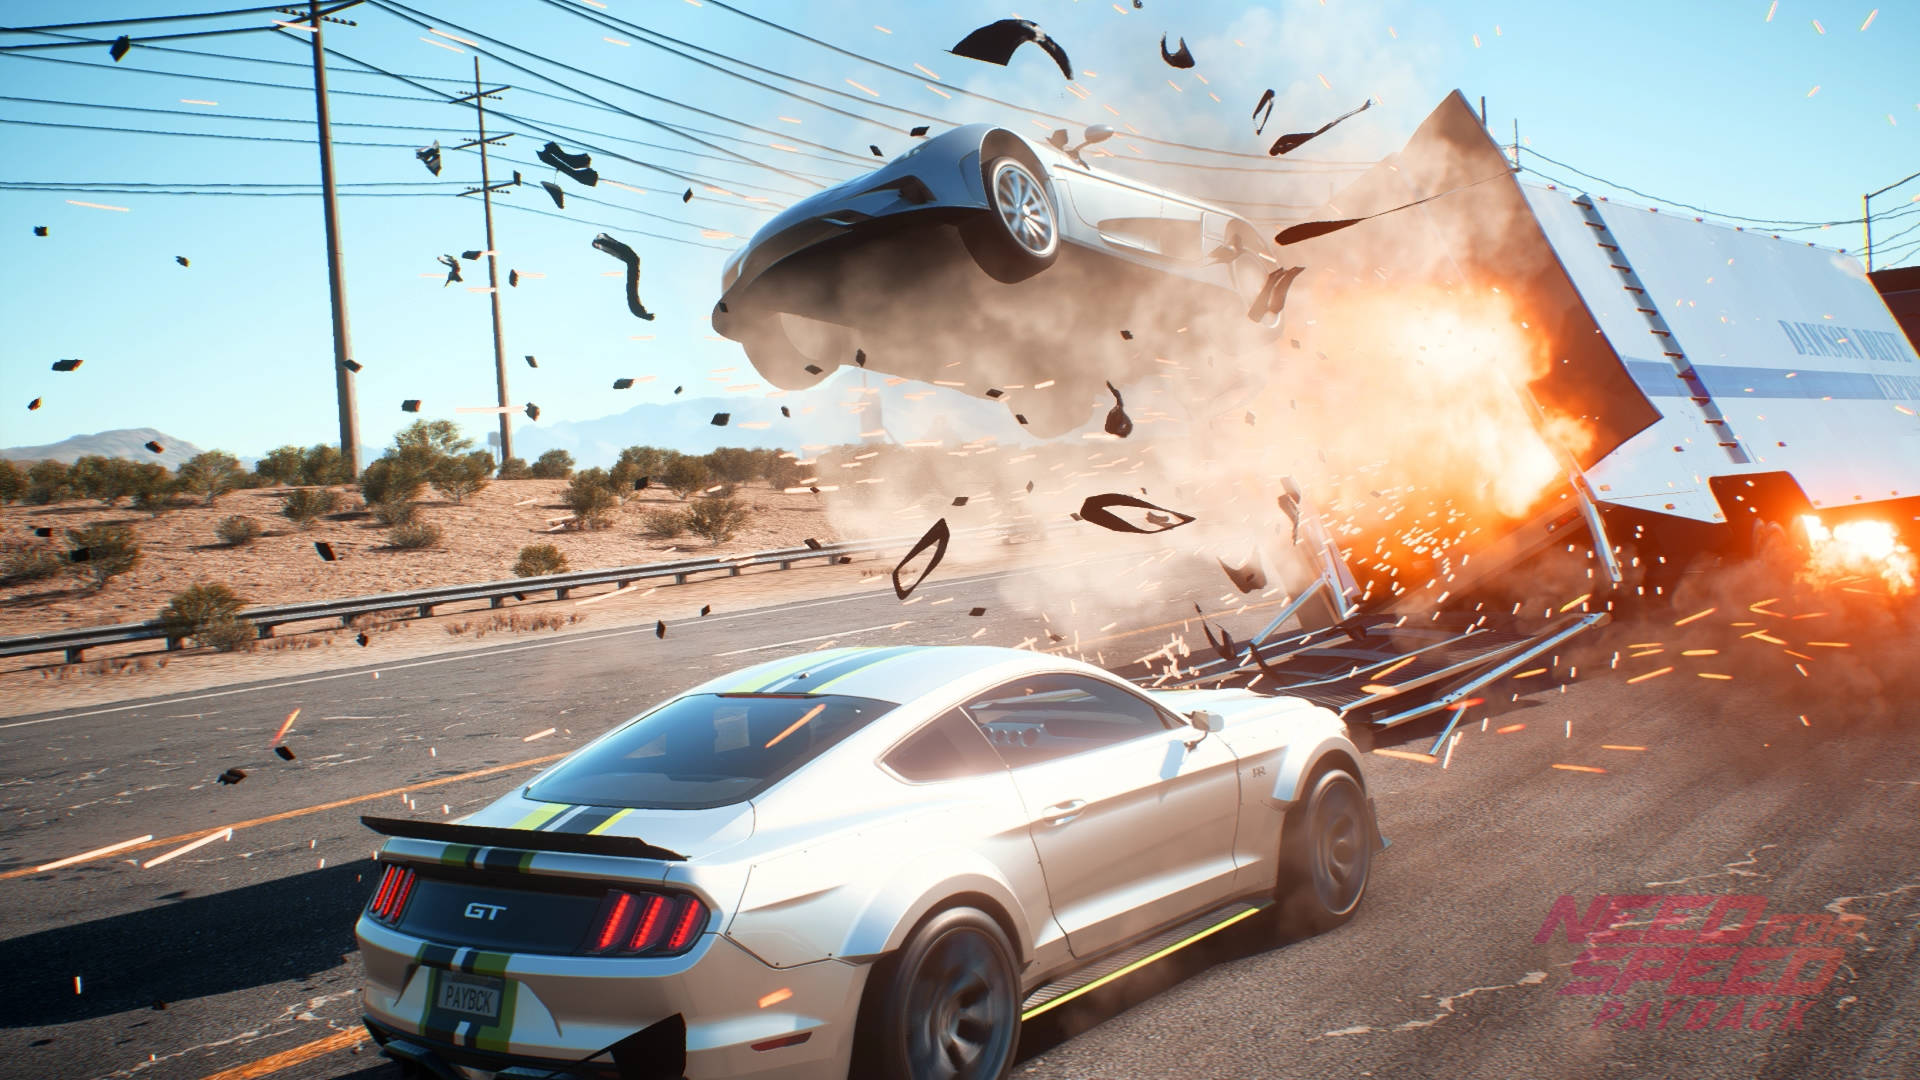 Thrilling Action In Need For Speed Payback - Car Crashing Scene Background